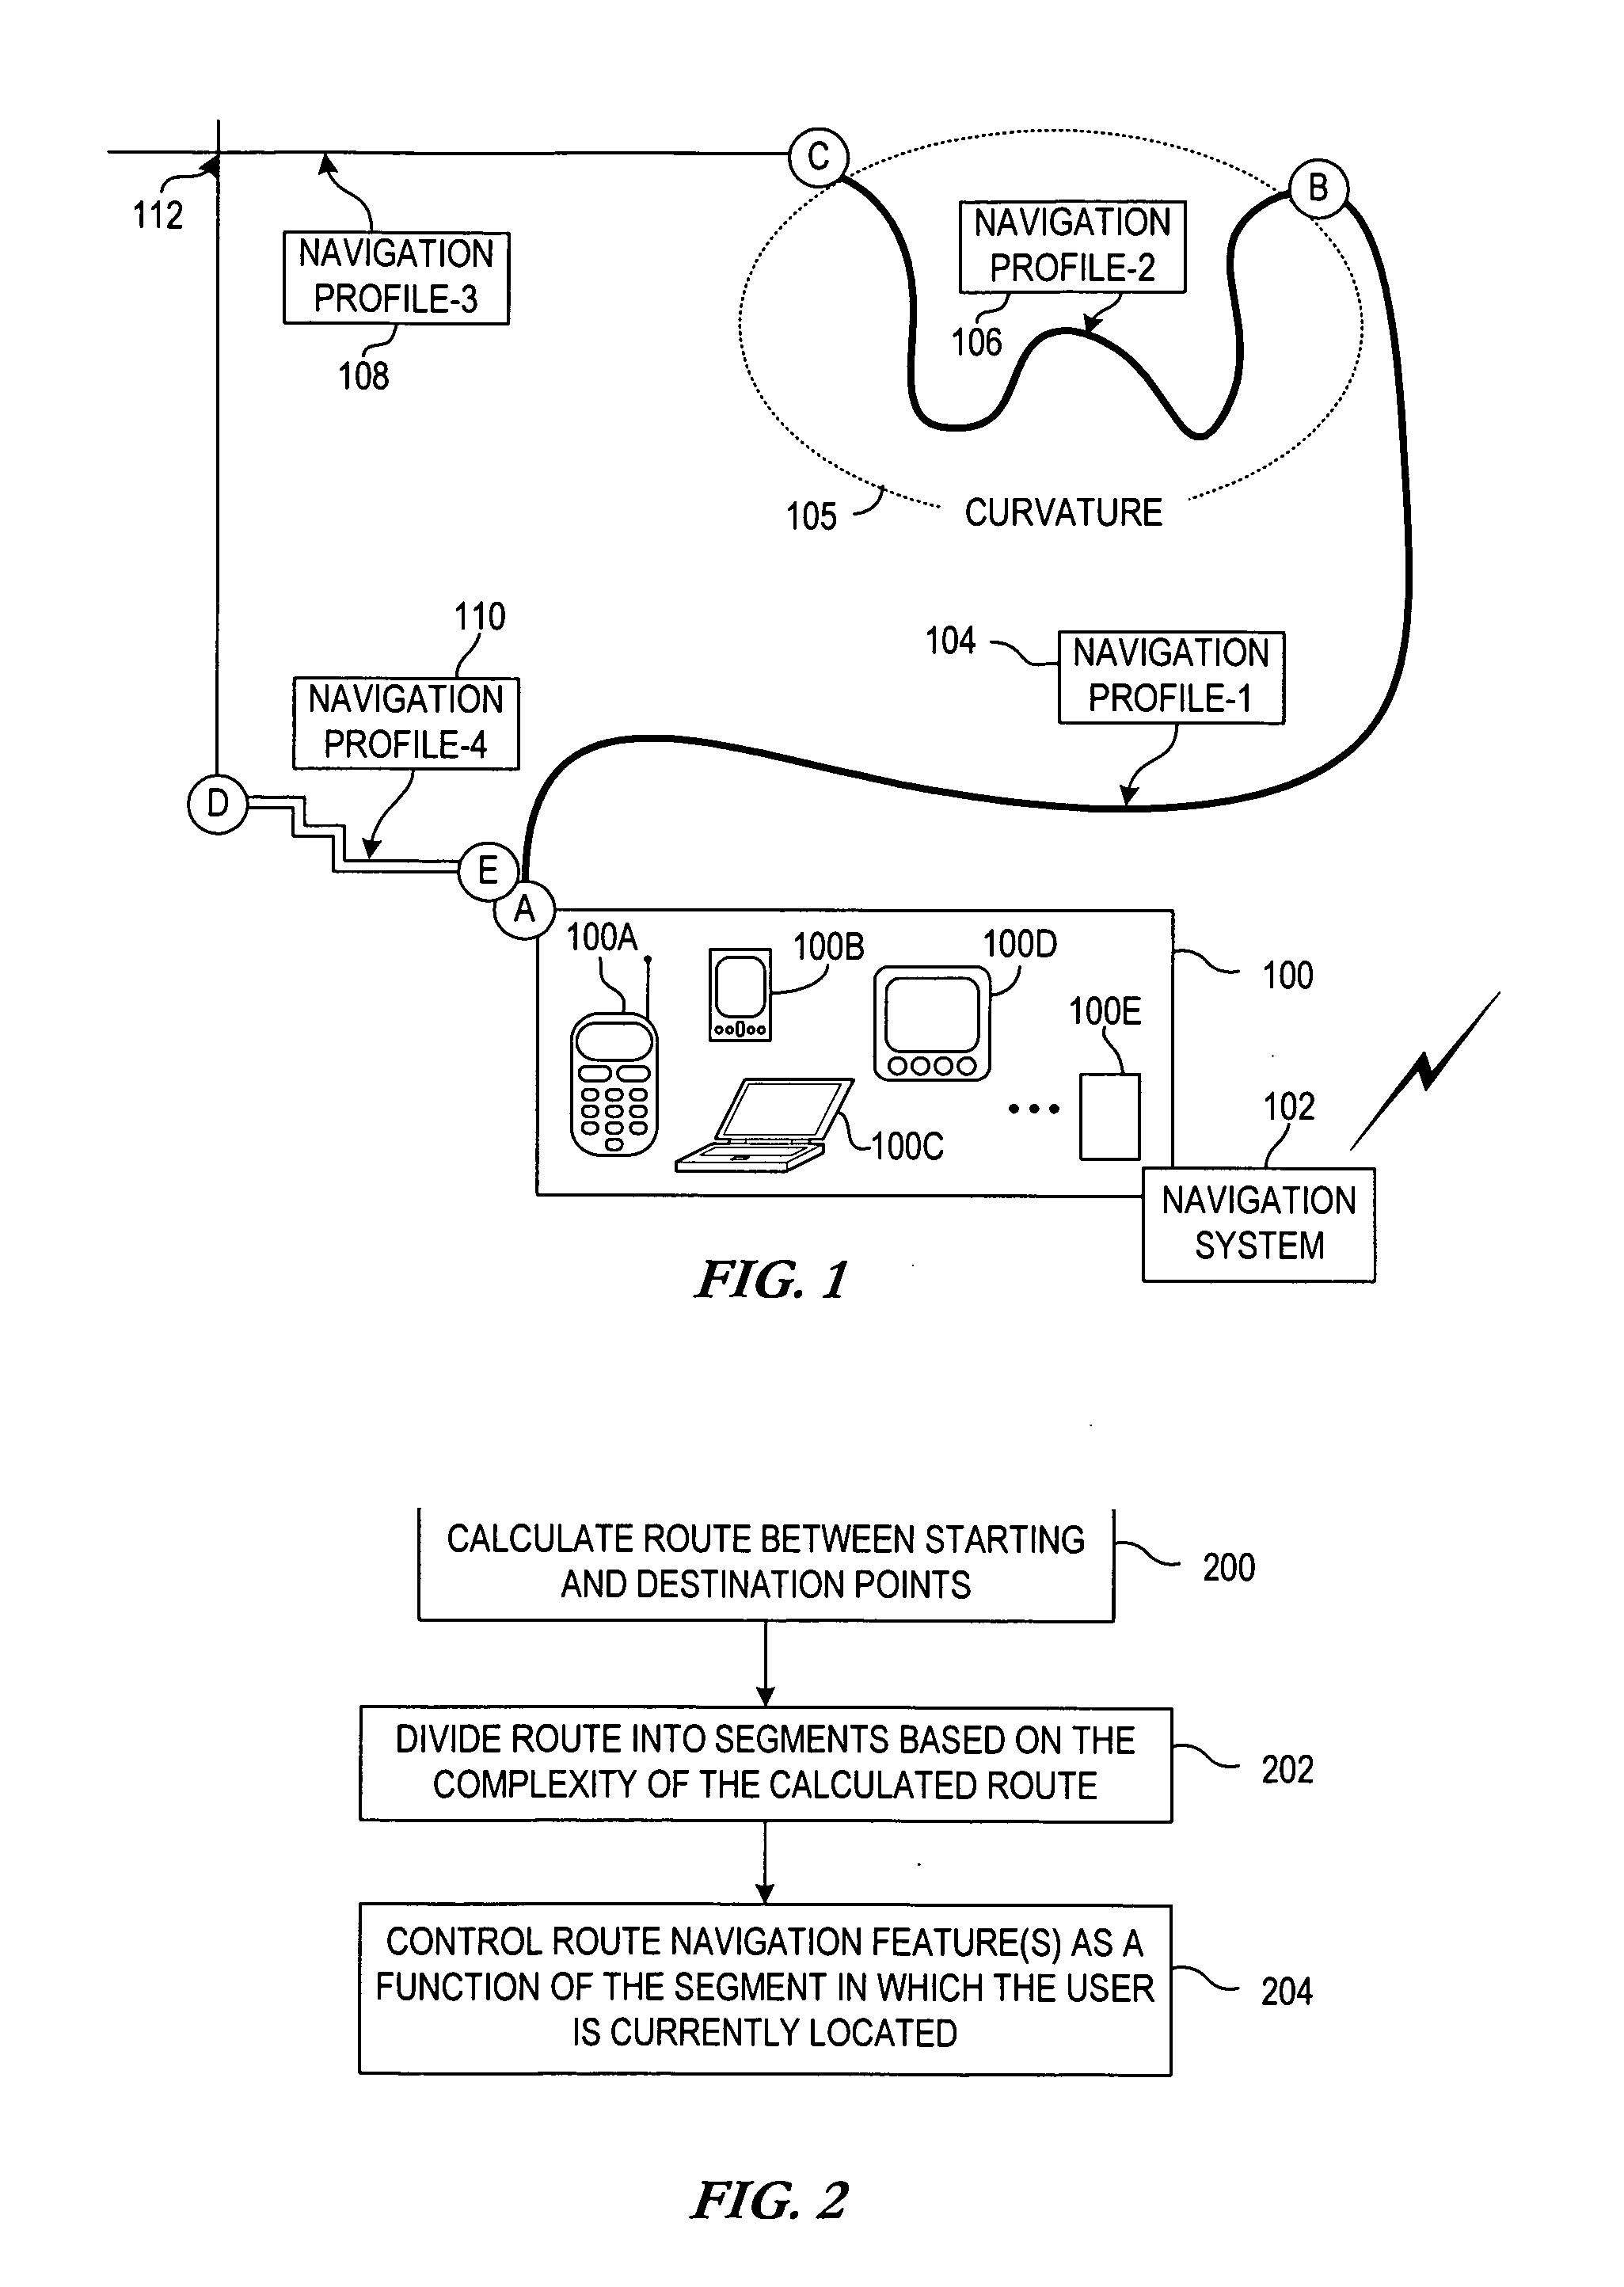 Apparatuses and methods for managing route navigation via mobile devices